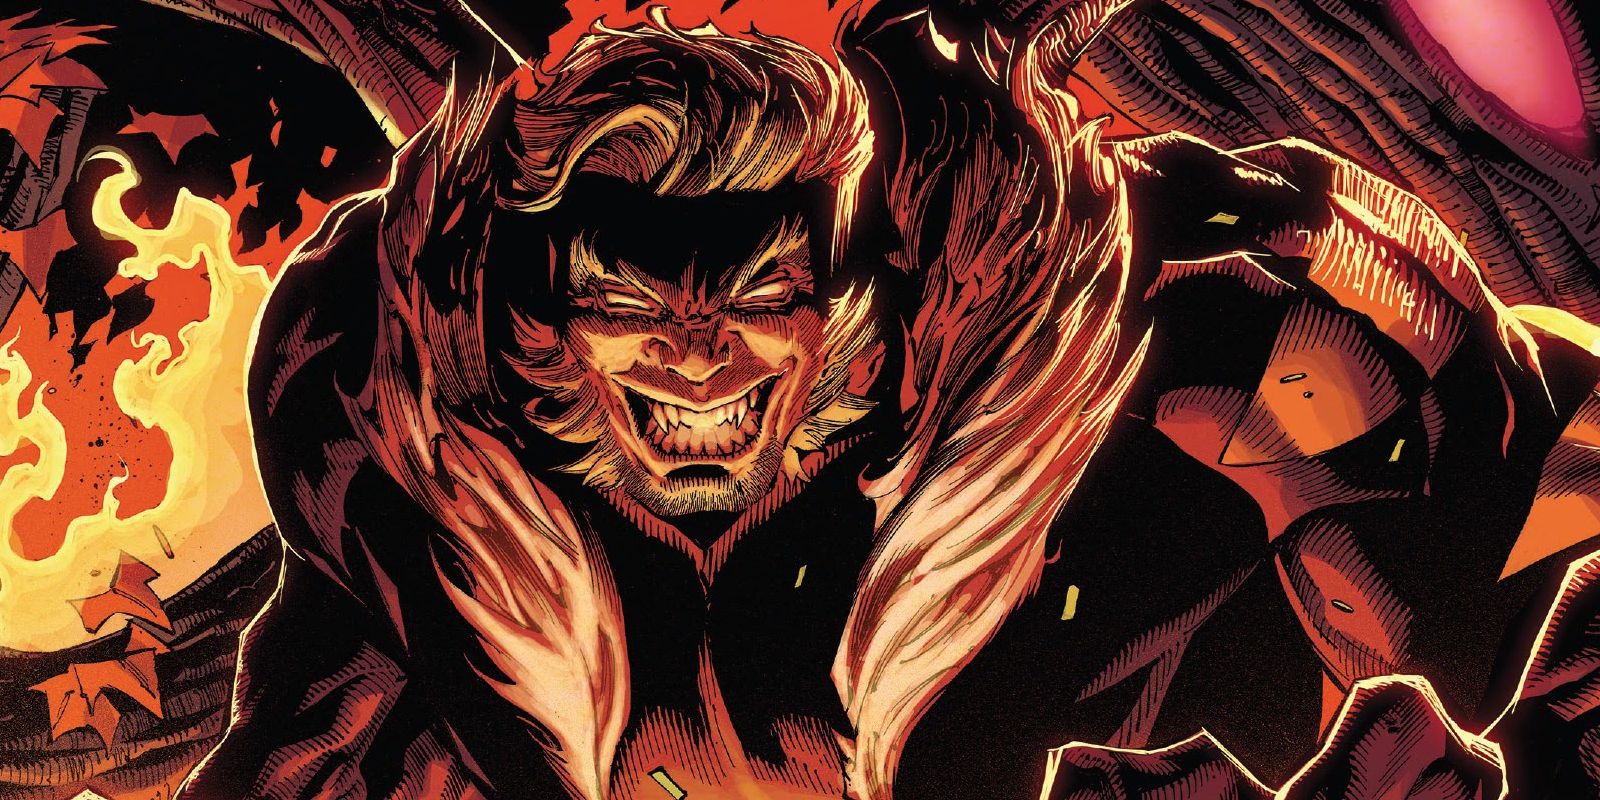 Sabretooth grinning in front of a wall of flames